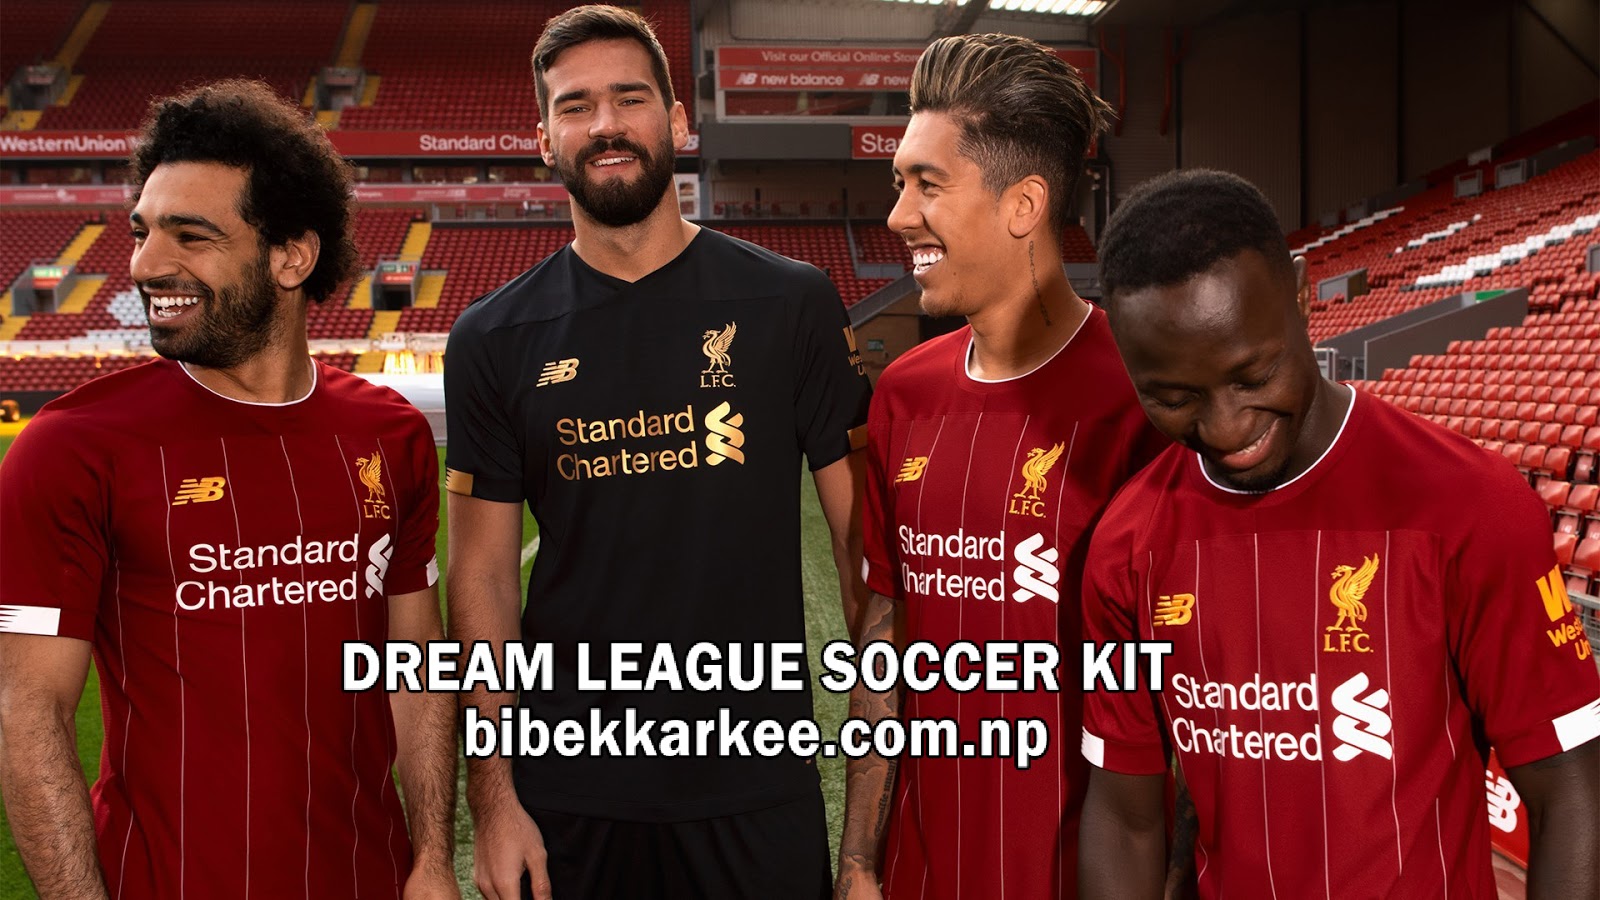 Get the latest Liverpool FC 2019/2020 dream league soccer kits and logo.